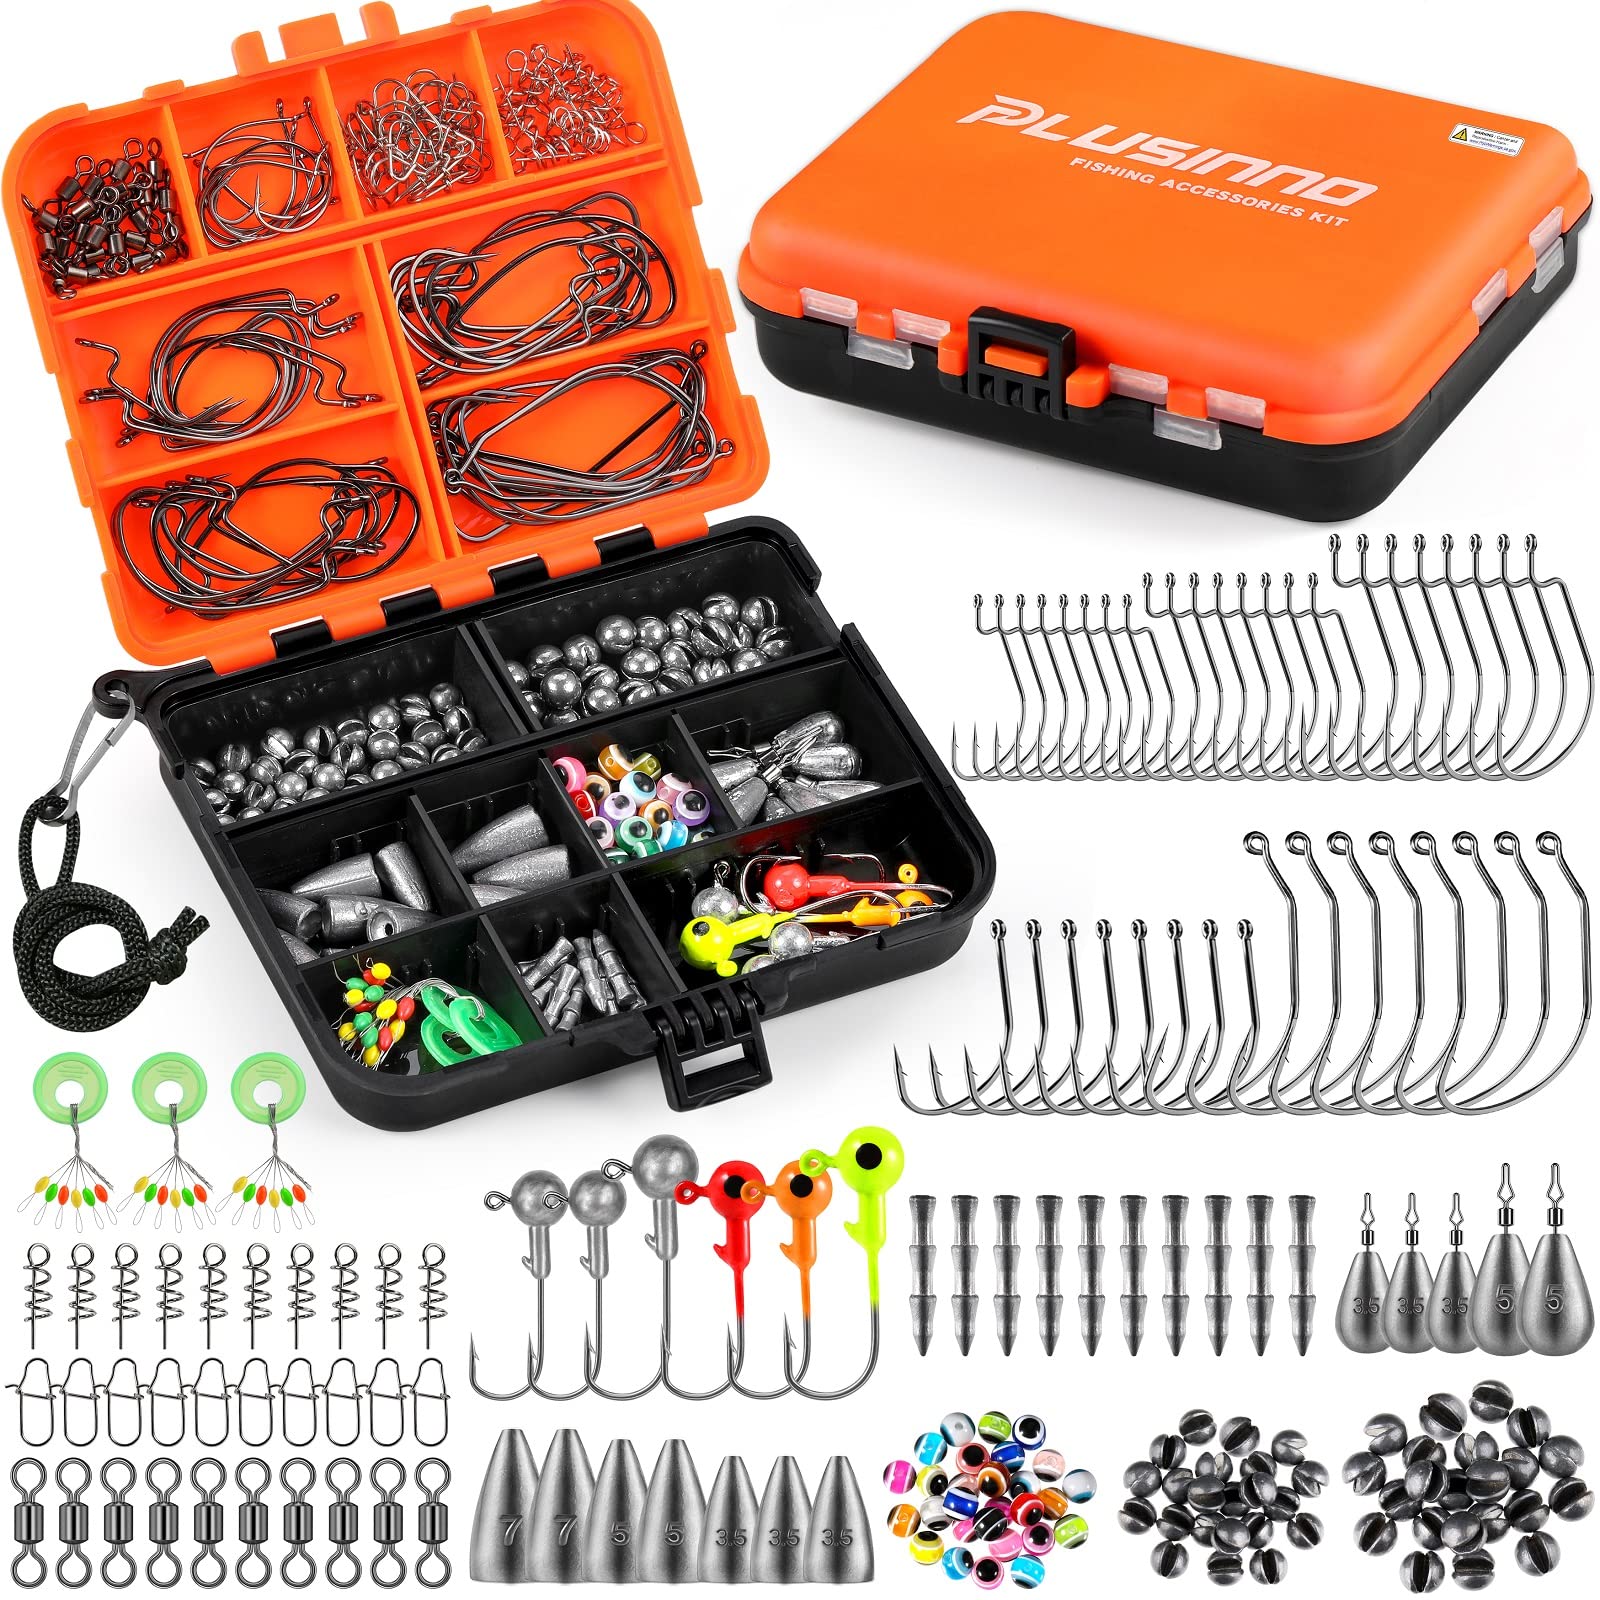 PLUSINNO 397pcs Fishing Accessories Kit, Fishing Tackle Box with Tackle  Included, Hooks, Weights, Jig Heads, Swivels Snaps Combined into 12 Rigs, Fishing  Gear Equipment for Bass, Bait Rigs -  Canada